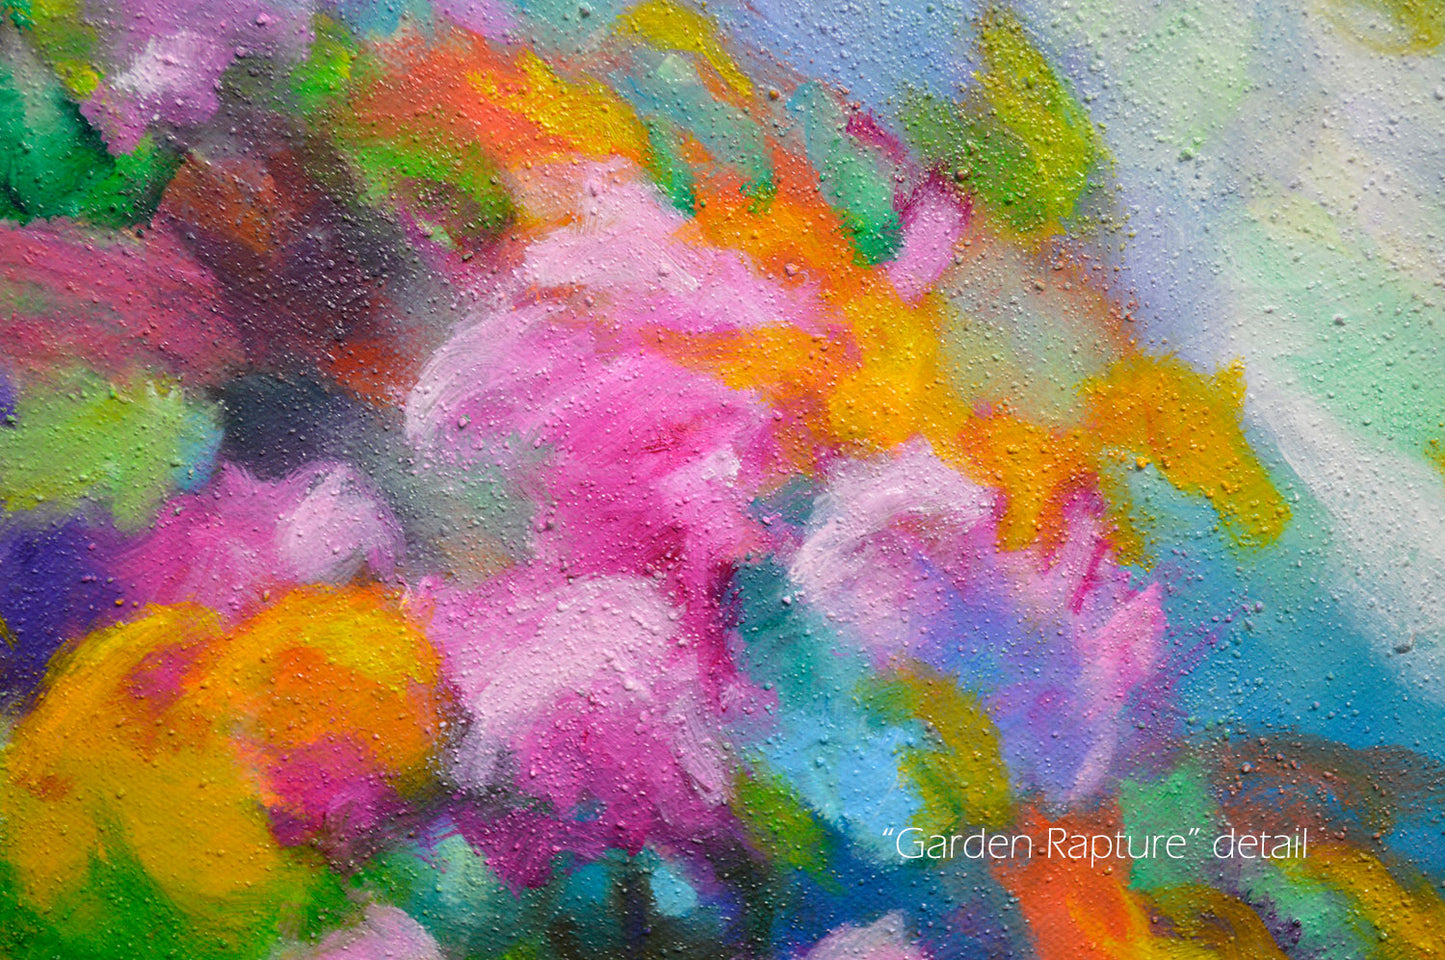 Abstract mixed media textured impasto painting "Garden Rapture" 24x36 inches, 1.5 inches deep with a very textured surface.  Original abstract art for sale.  I was really enjoying the late summer blossoms this year, and the feeling made it's way into this painting.  Filled with beautiful, colorful summer floral blossoms. Detail view.